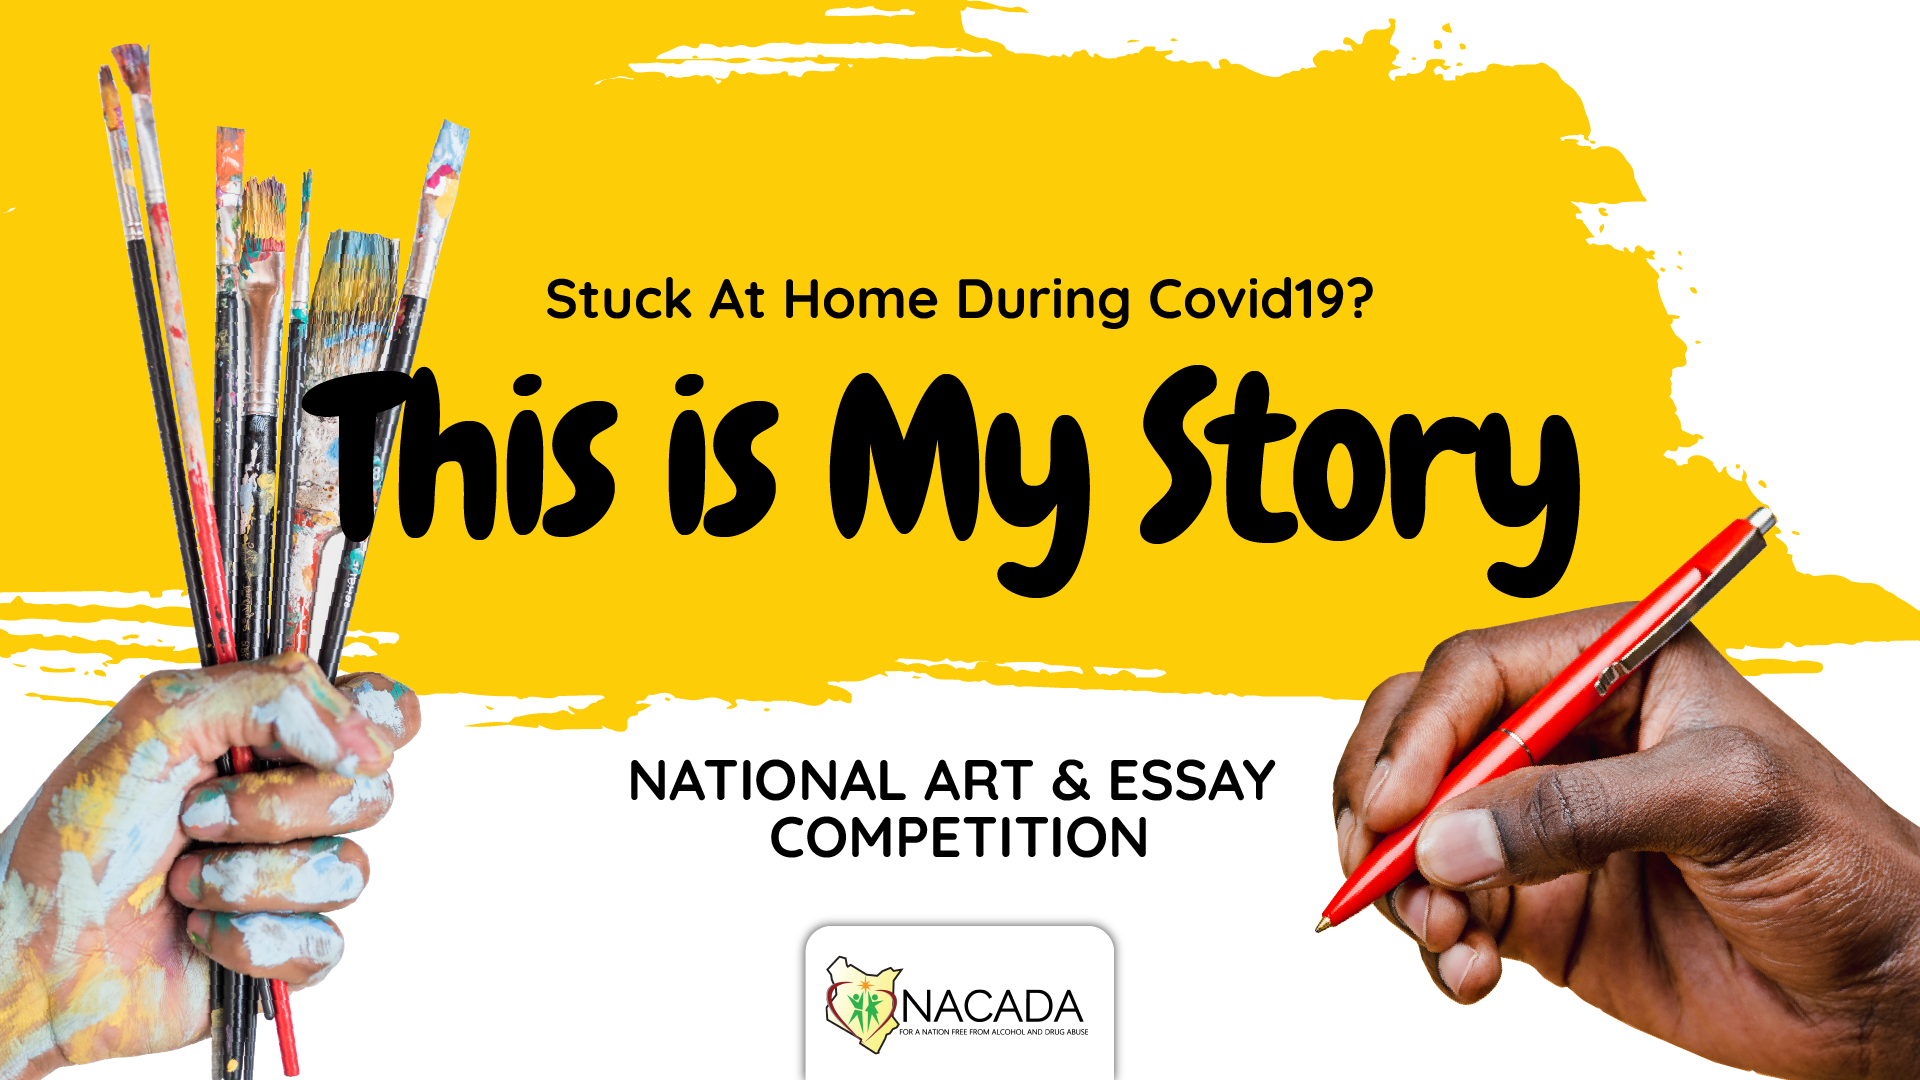 NACADA This is My story